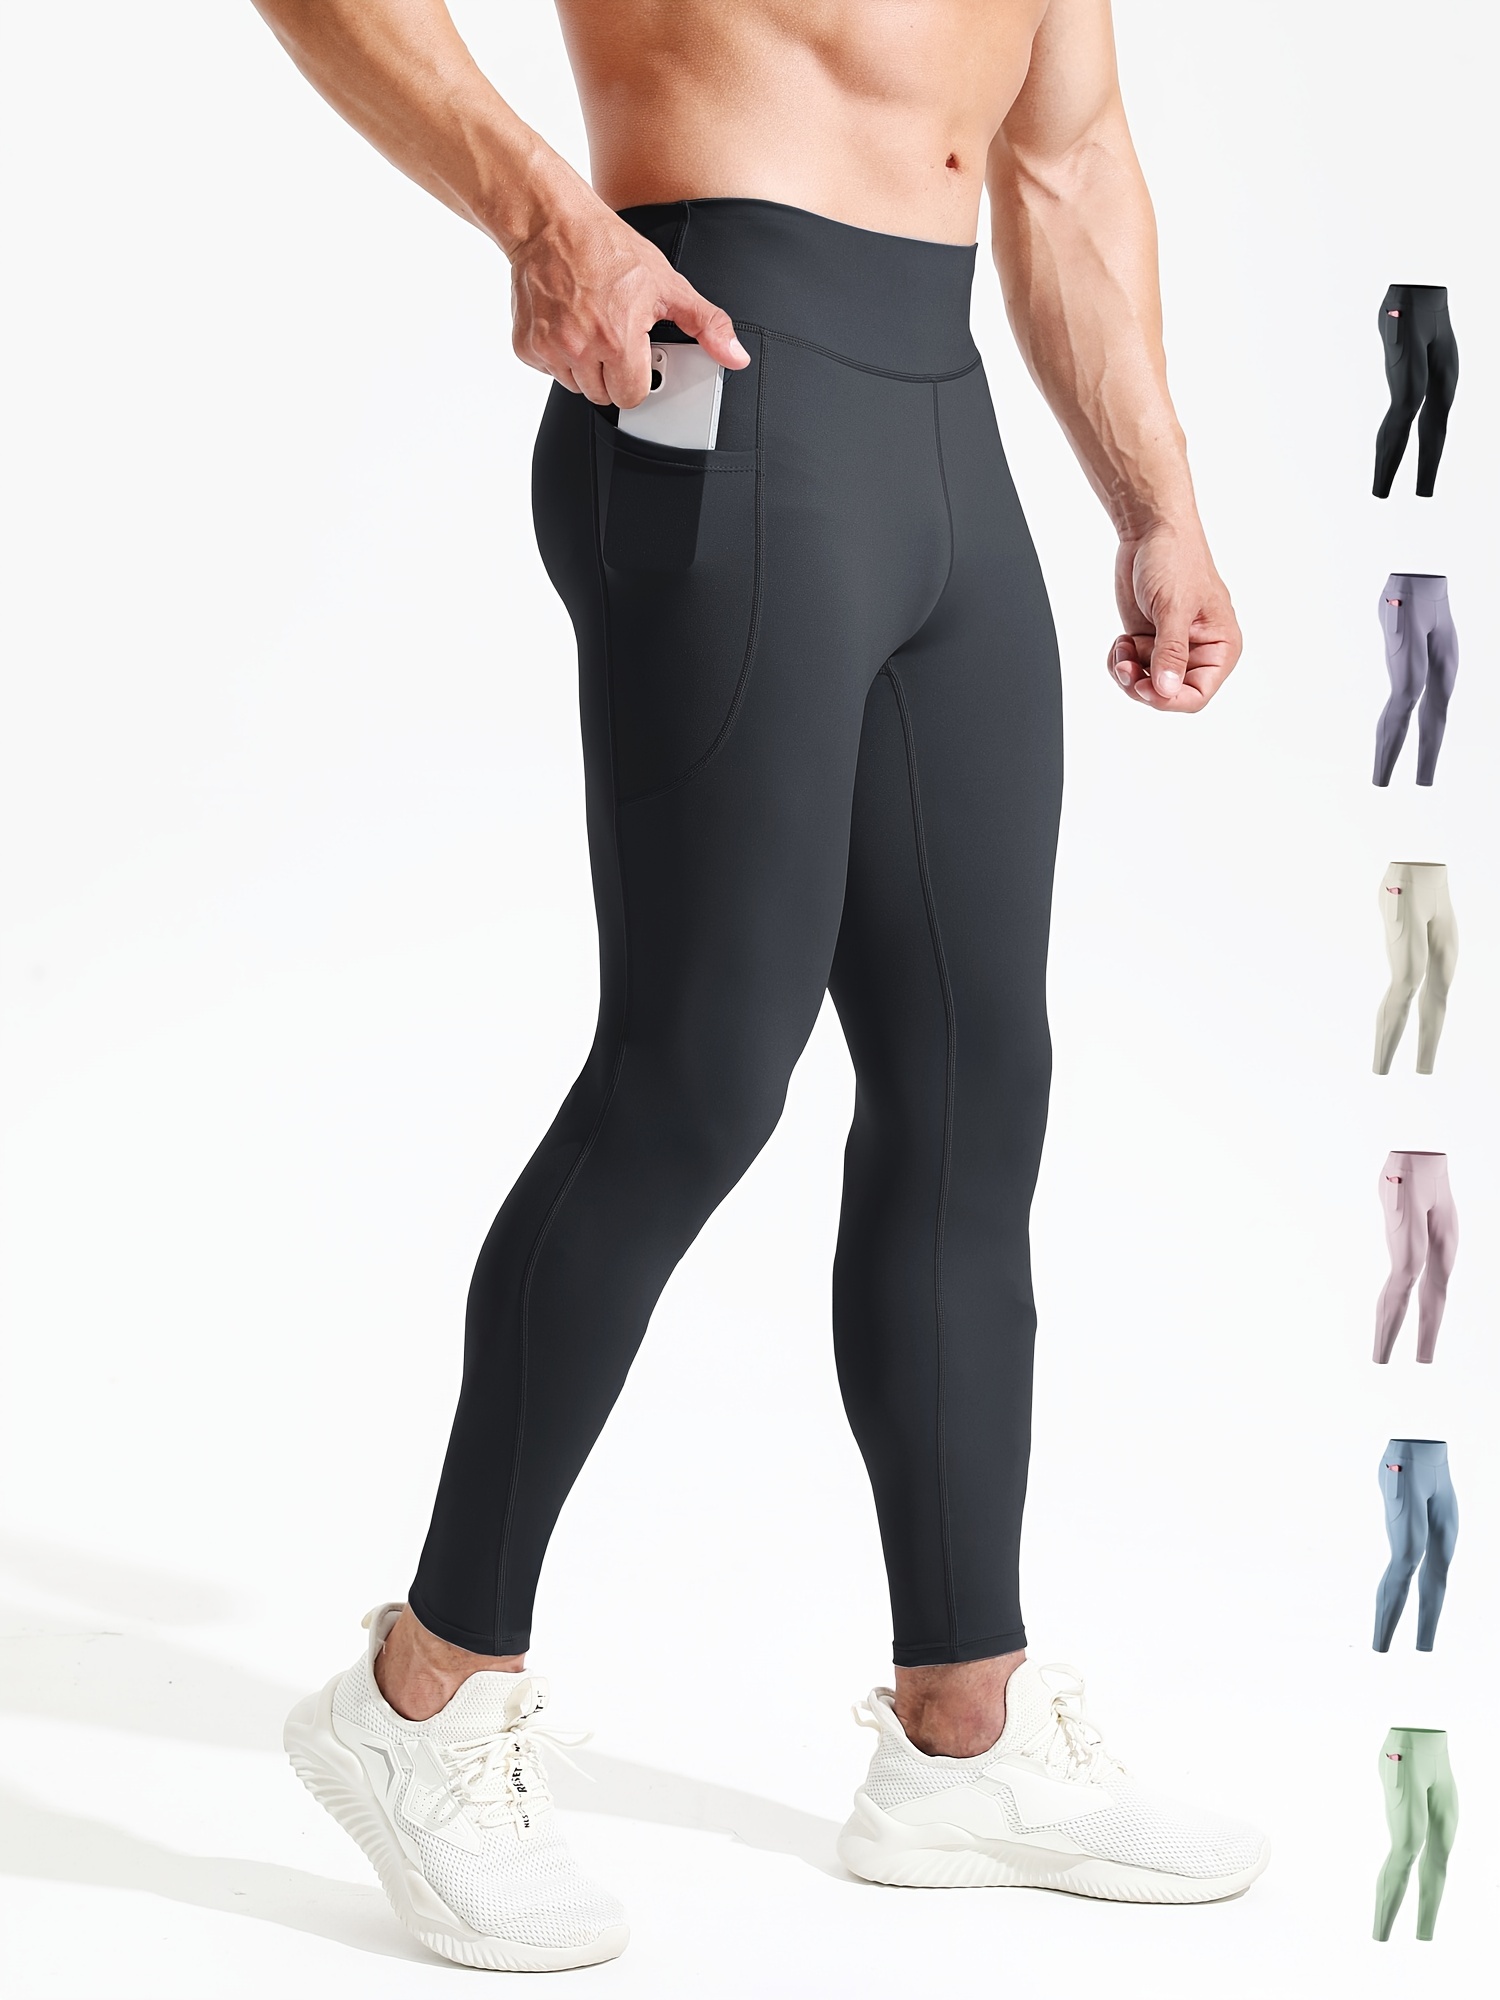  Mens Small Leggings Compression Pants Men XL Gym Compression  Pants Men Athletic Compression Tights Men Gray Running Legging Men Tights  Mens Compression Pants with Pocket : Clothing, Shoes & Jewelry